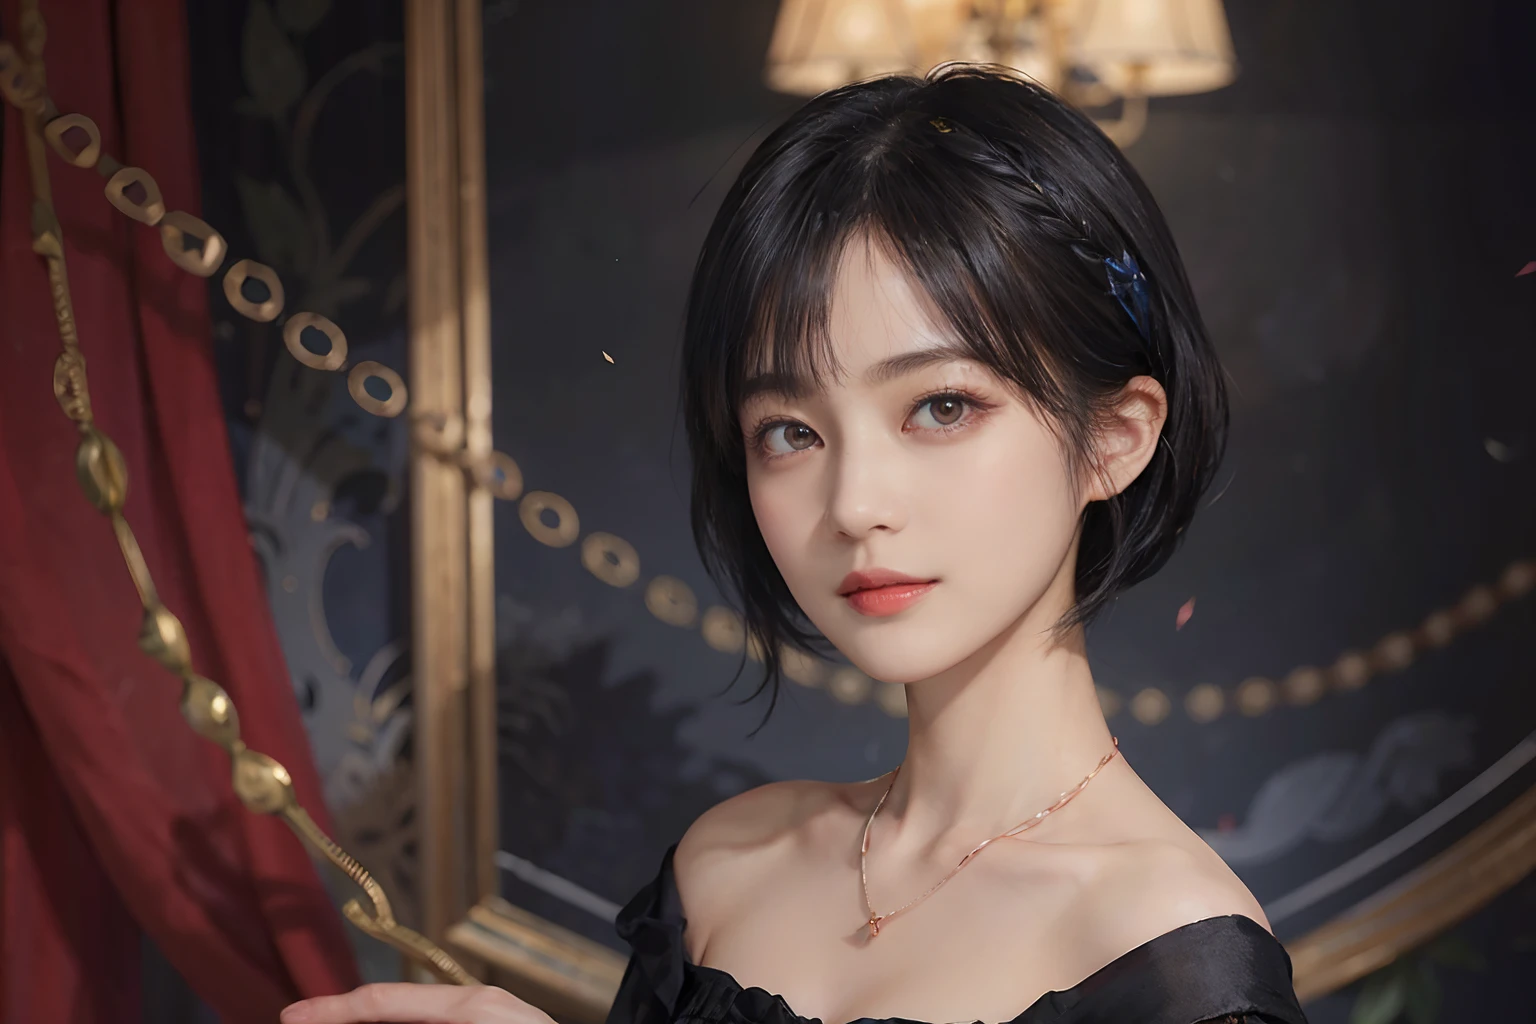 ((1womanl)),  (((Black Shorthair))), （masuter piece：1,3）、top-quality、​masterpiece、hight resolution、Original、highly detailed wallpaper、dress code、Luxurious necklace, (A slight smil)、a small face、((Breast))、(Red and blue dress)、(Light on Face)、Live-action style, Beautiful facial features, darkened room, ((Hu Dilan))